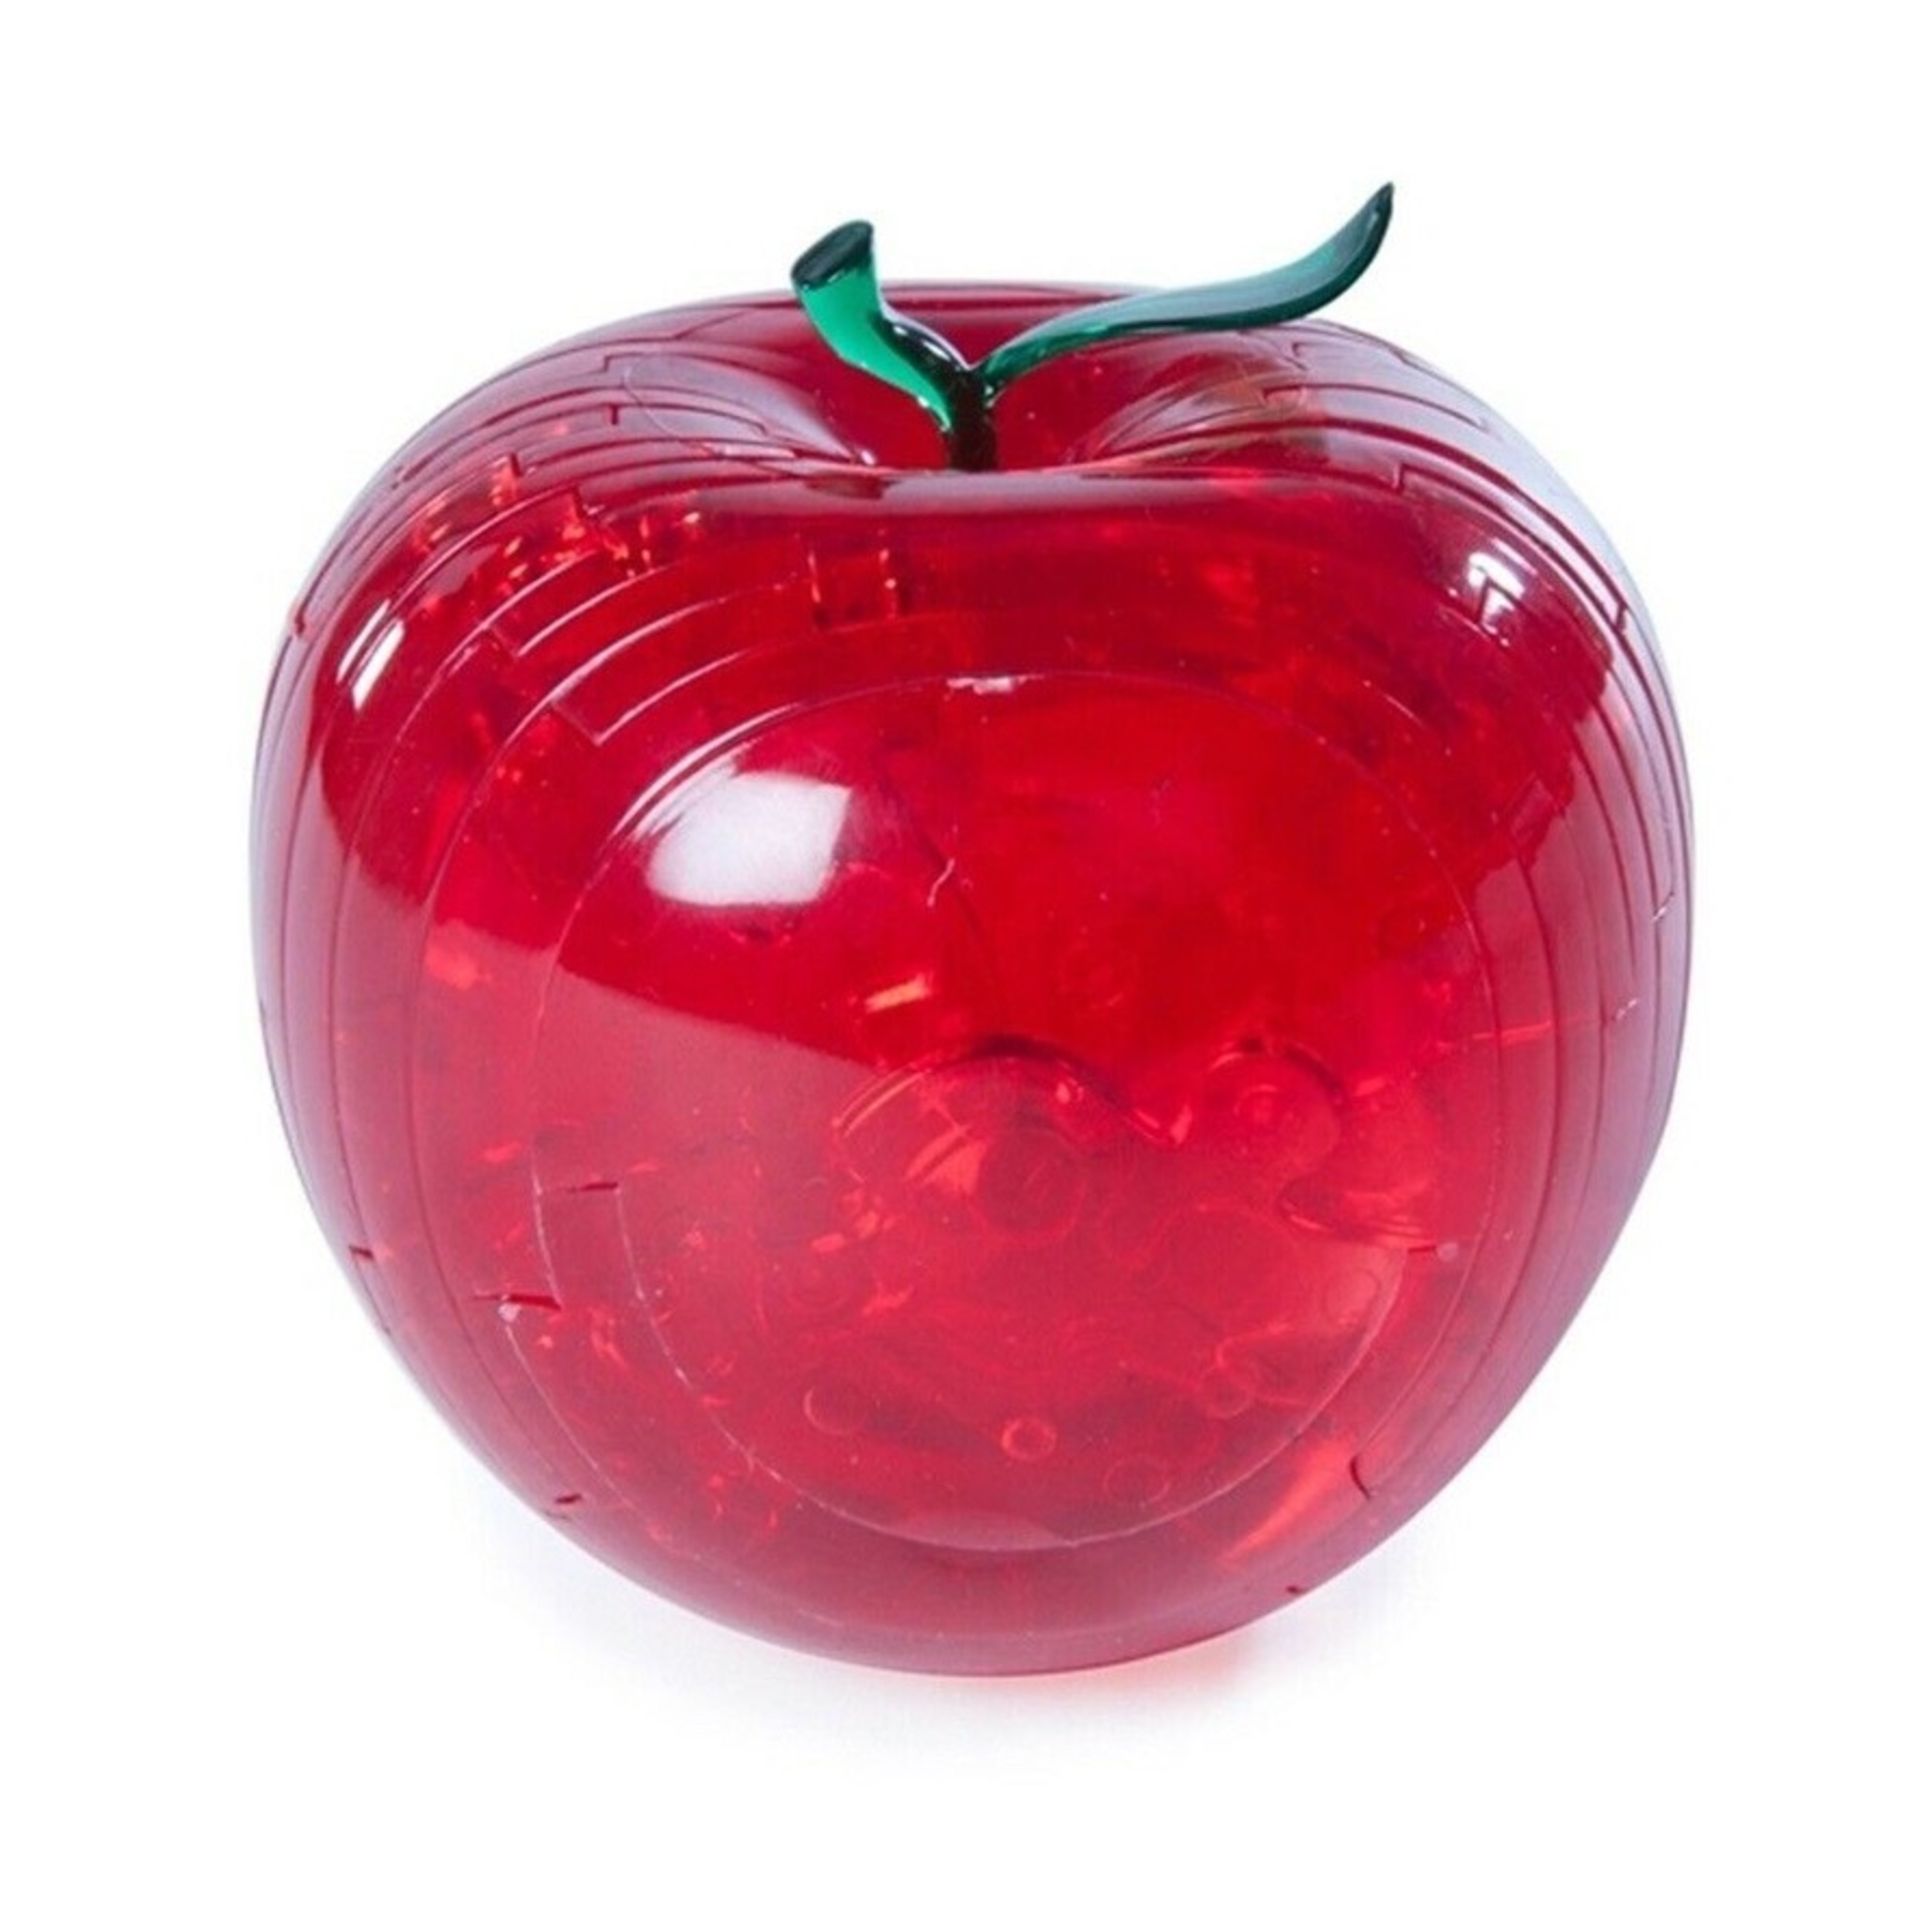 8 x 3D Jigsaw Puzzle. Red Apple with Flashing LED Lights. incs. Batteries. - Image 3 of 4